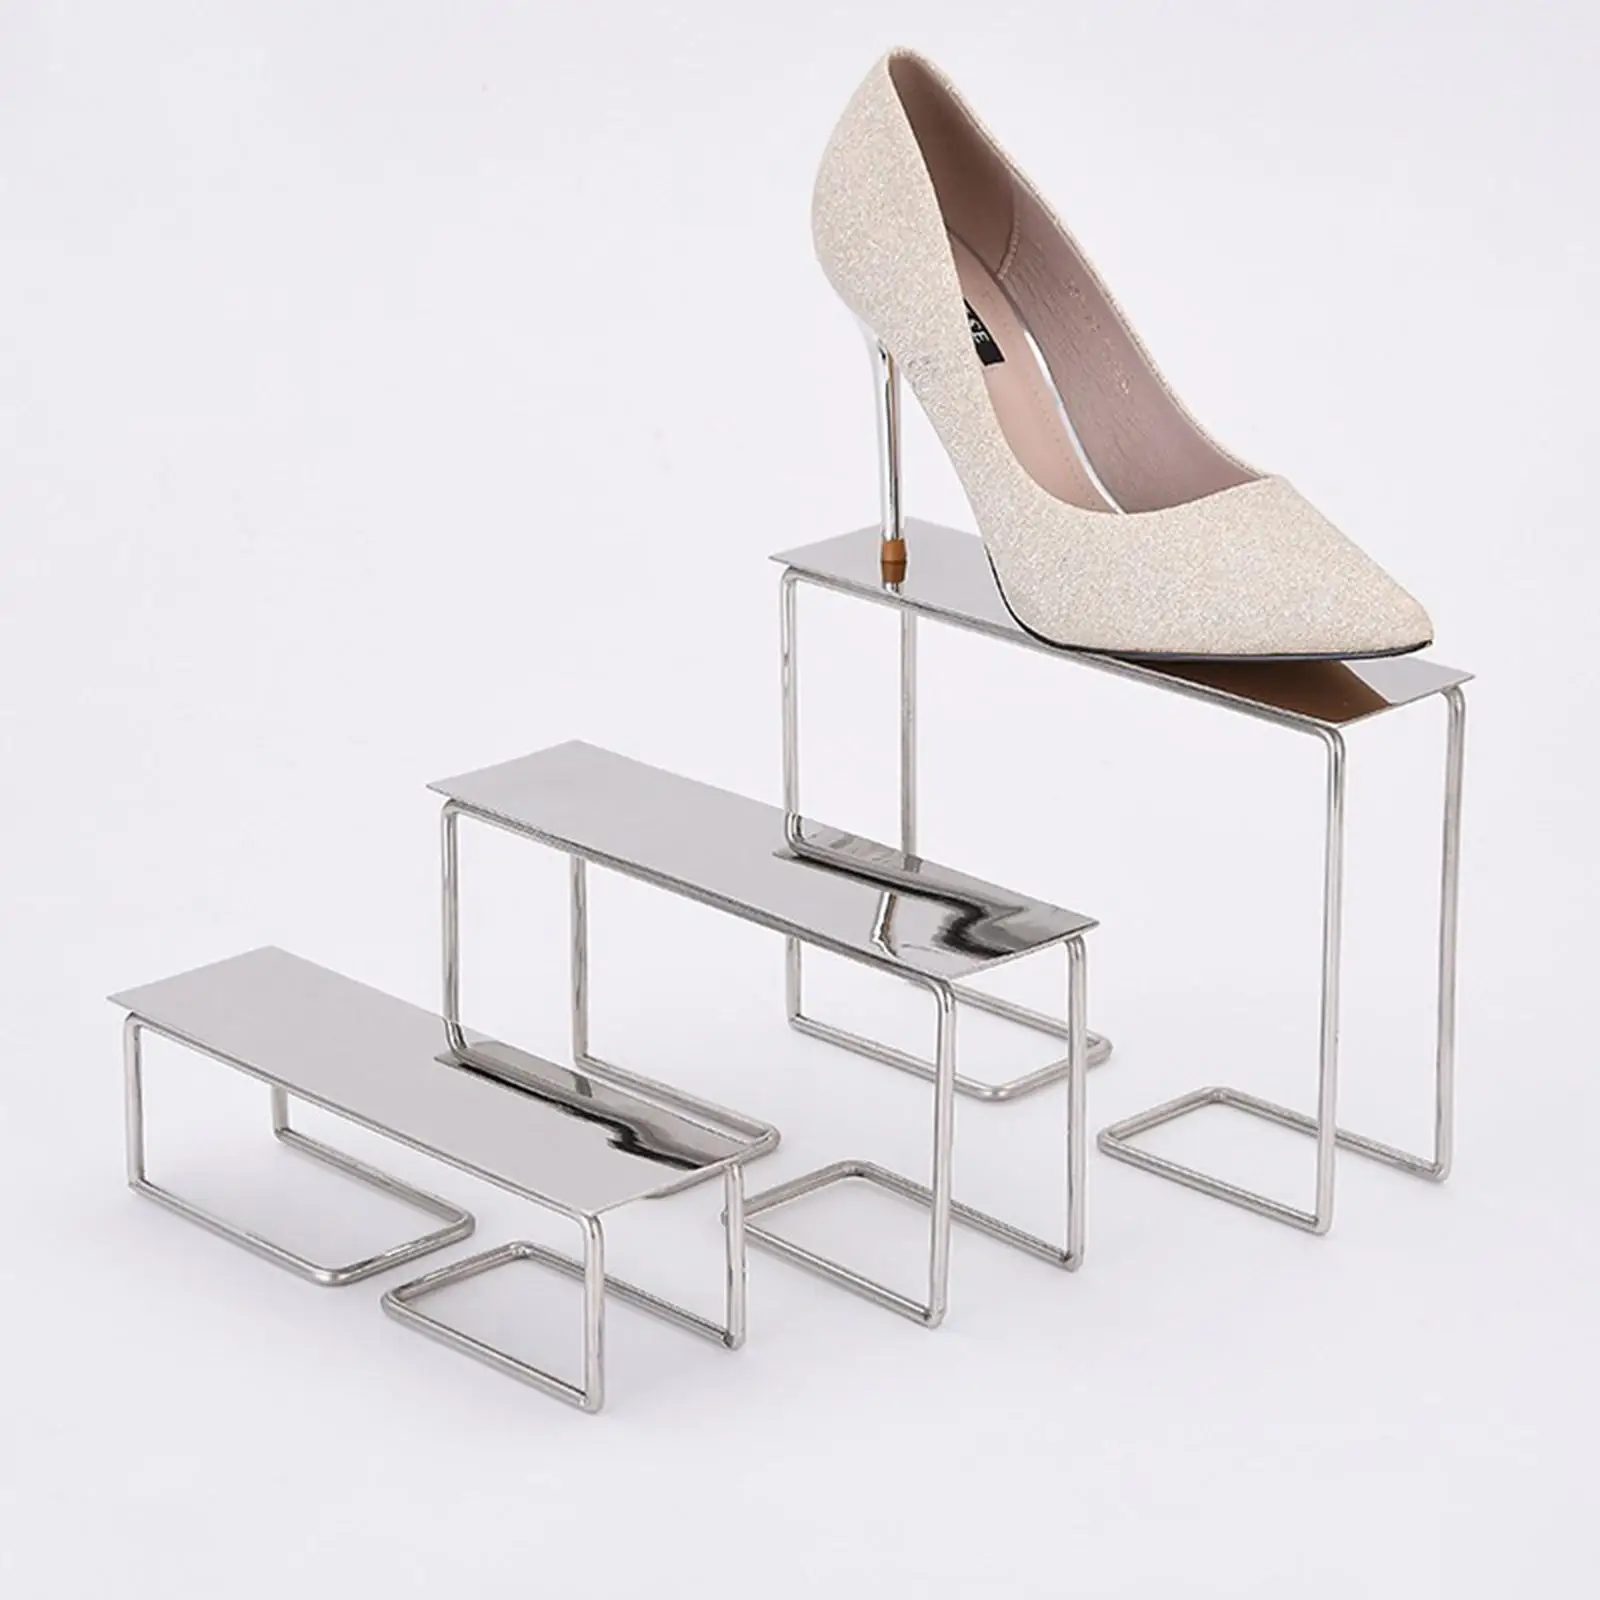 shoes display Stand Shelf Metal Storage Prop Shoes Display Stand Holder for Sandals Sports Shoe Countertop Window Display Stands